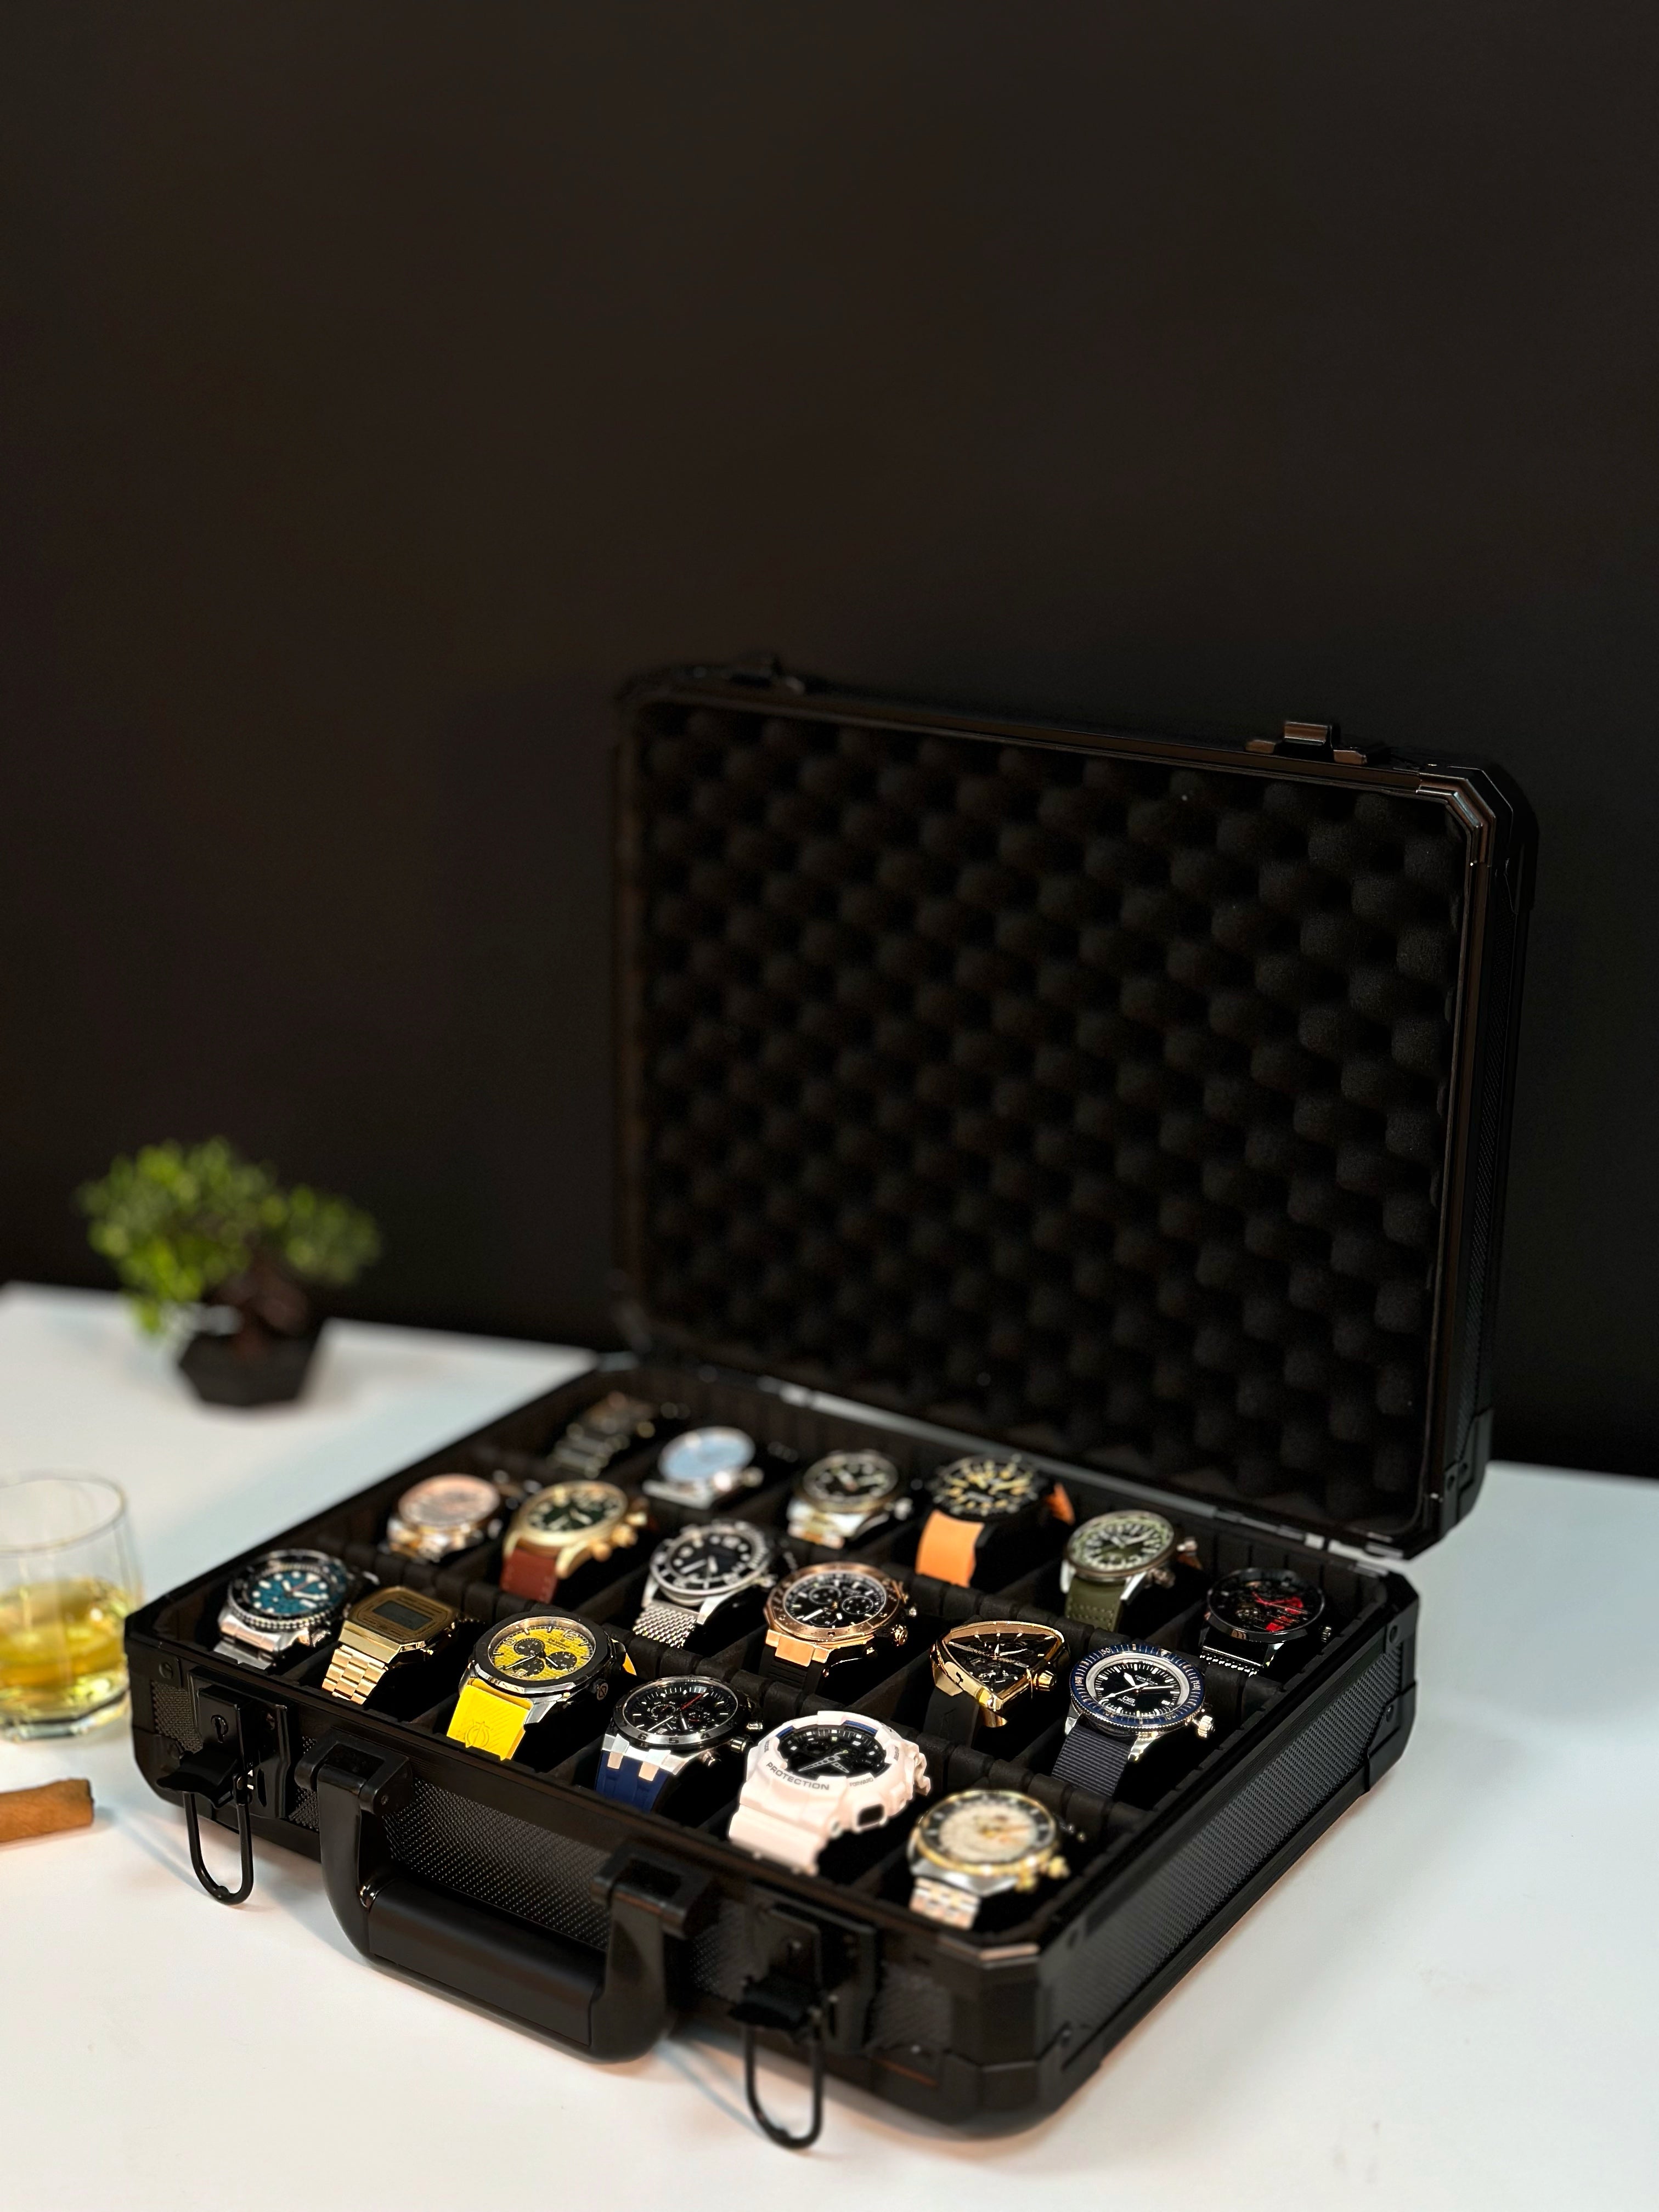 Luxurious black case storing 18 watches